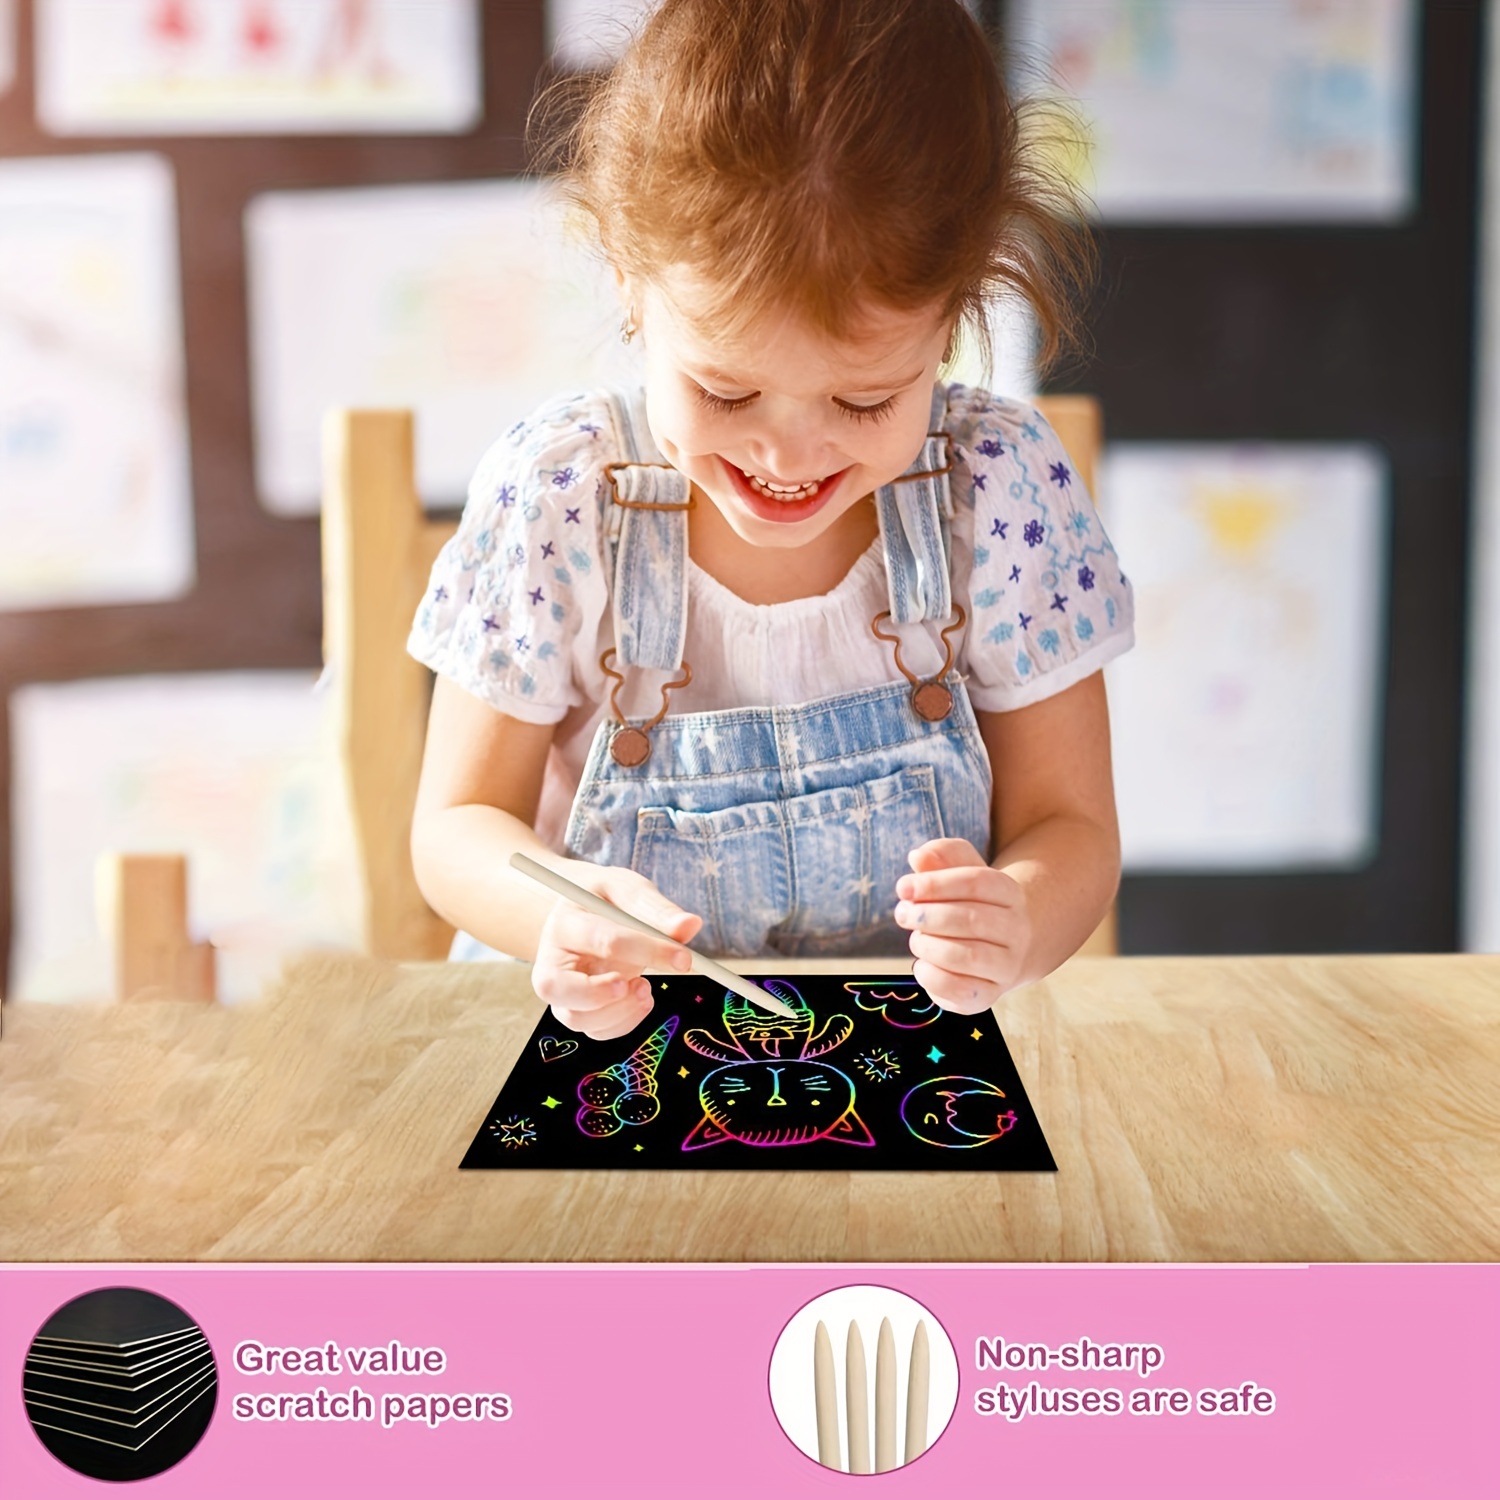 Safely Designed craft kits For Fun And Learning 